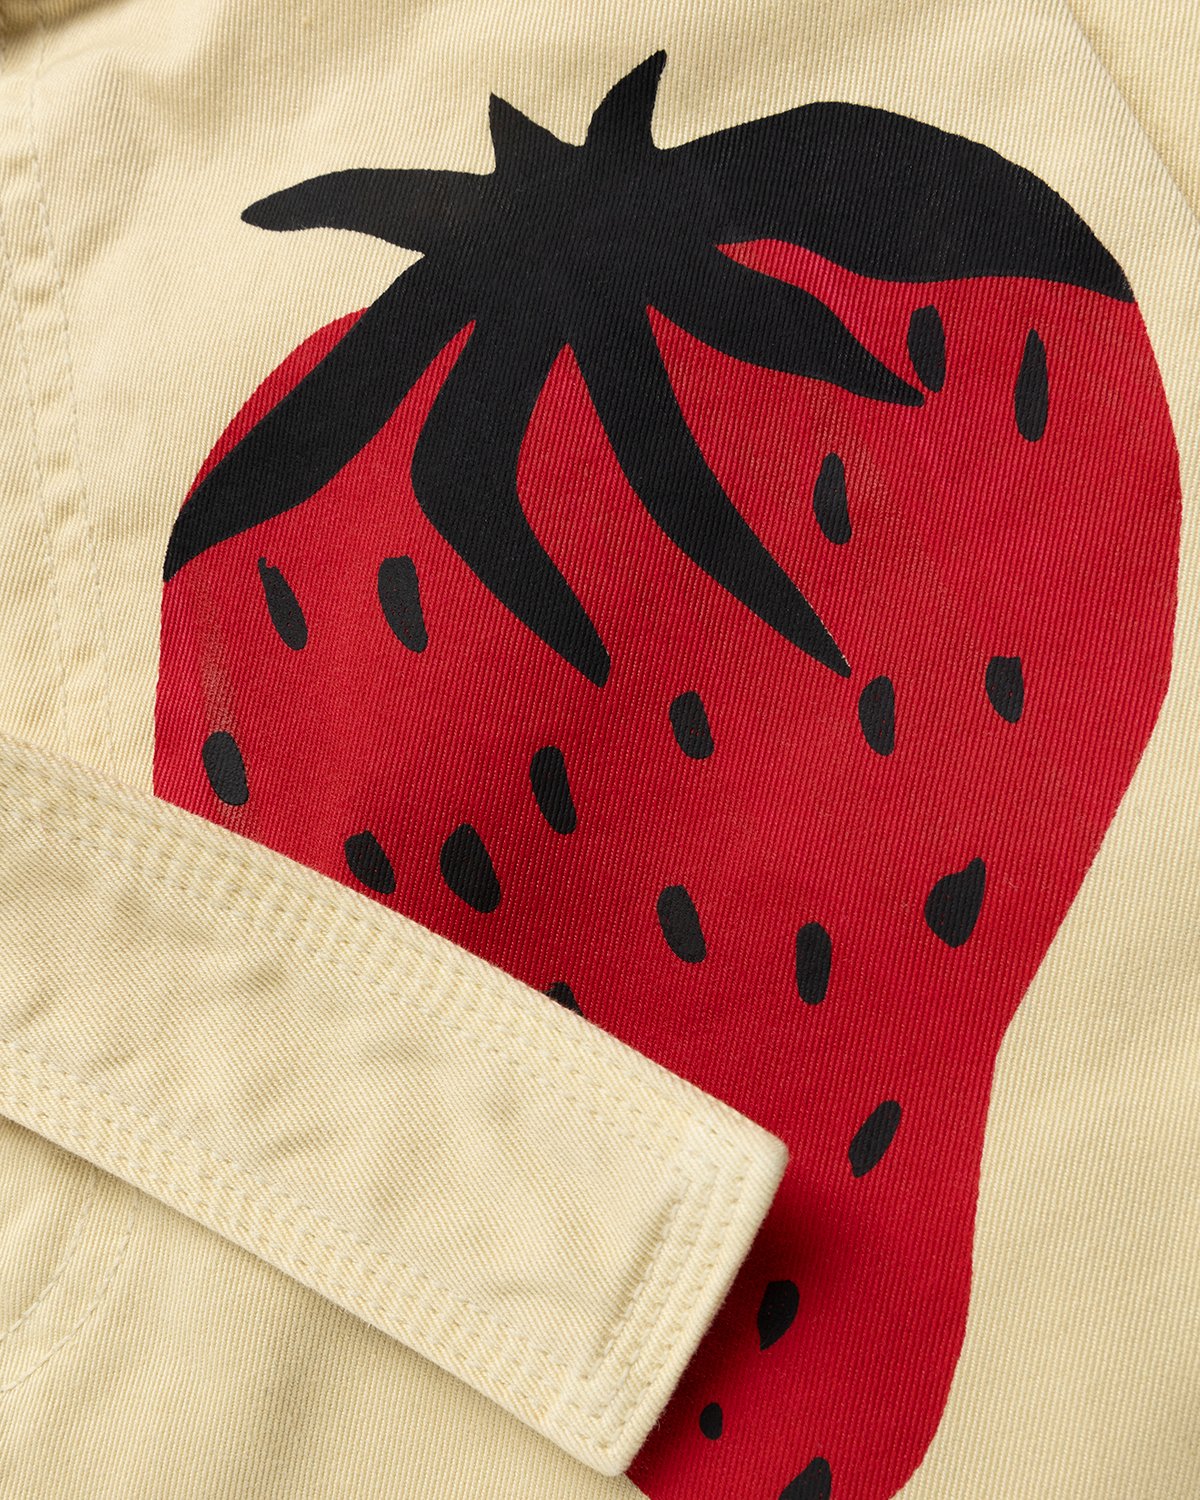 J.W. Anderson - Strawberry Chino Shorts Natural/Red - Clothing - Beige - Image 5